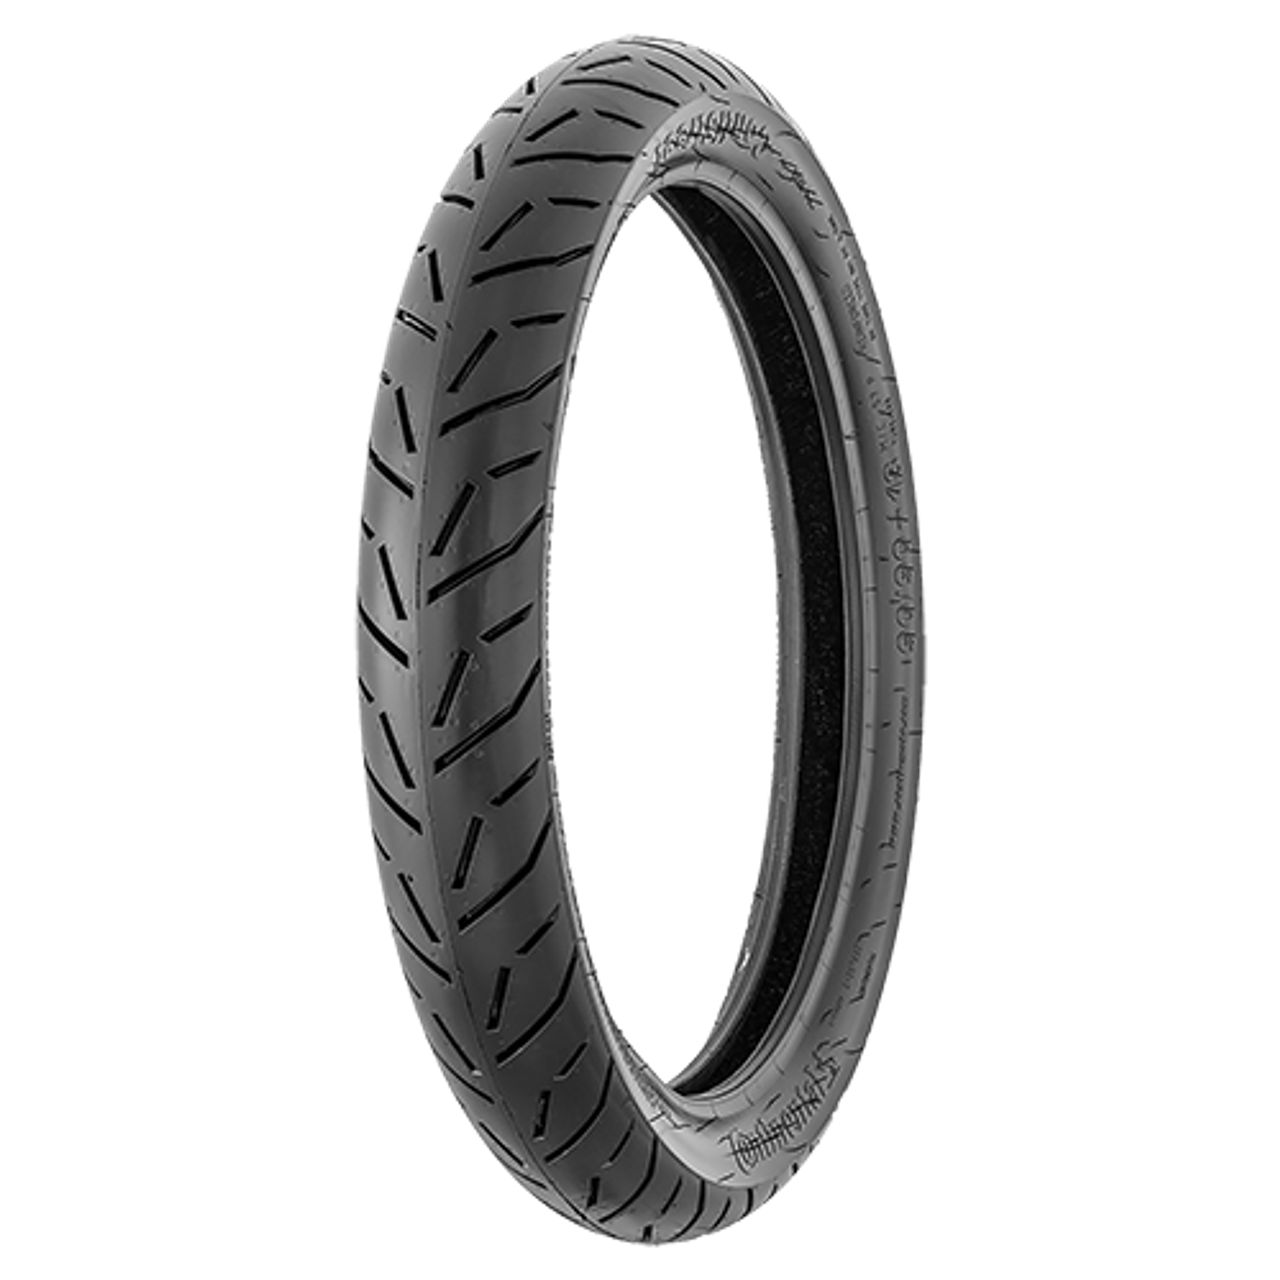 CONTINENTAL CONTISTREET 2.75 - 18 M/C XL TL 48P BSW FRONT/REAR